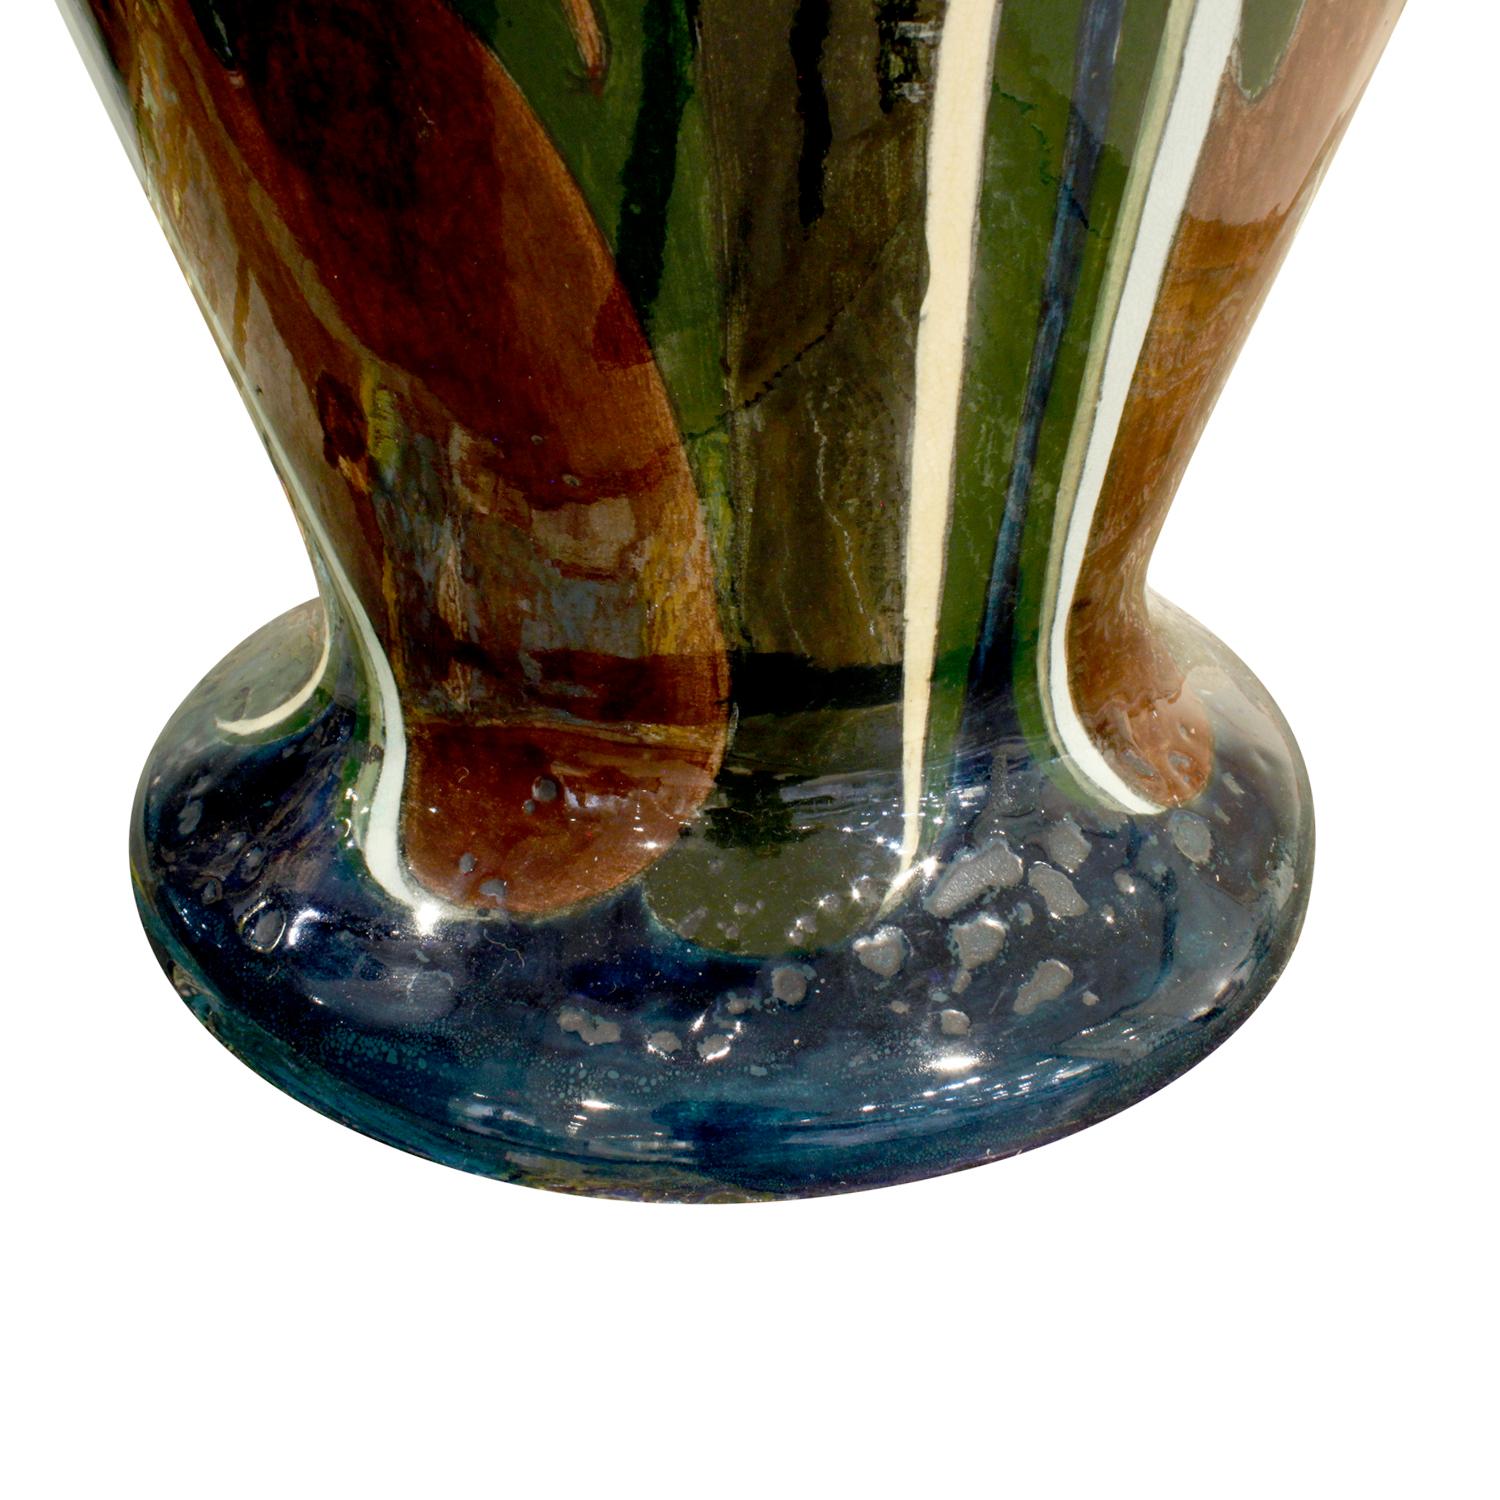 Late 19th Century Brantjes Pair of Monumental Art Nouveau Hand Painted Ceramic Vases 1896 ‘Signed’